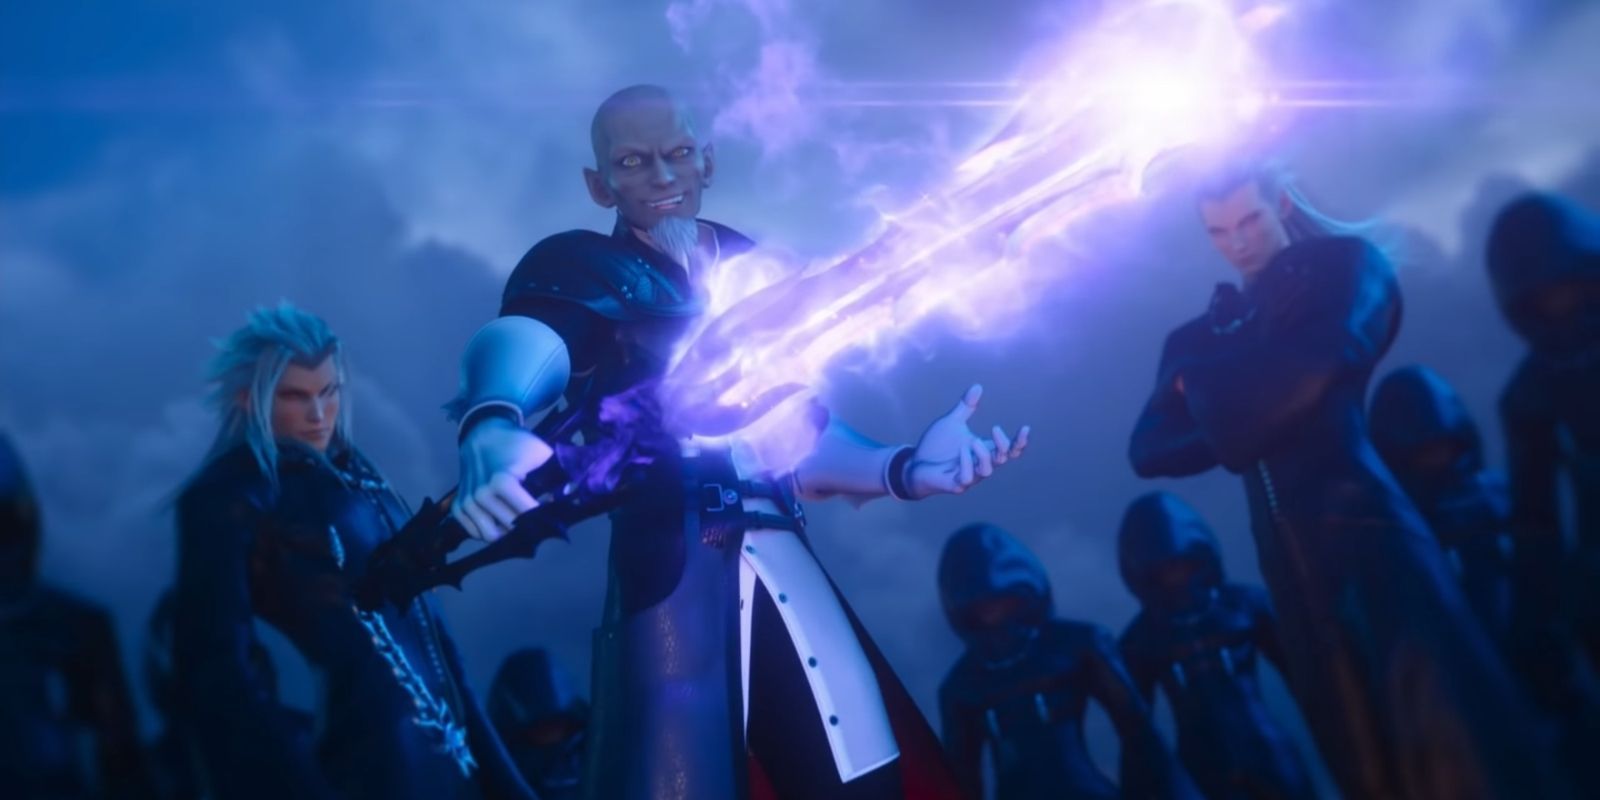 Xehanort holds his Keyblade in Kingdom Hearts 3